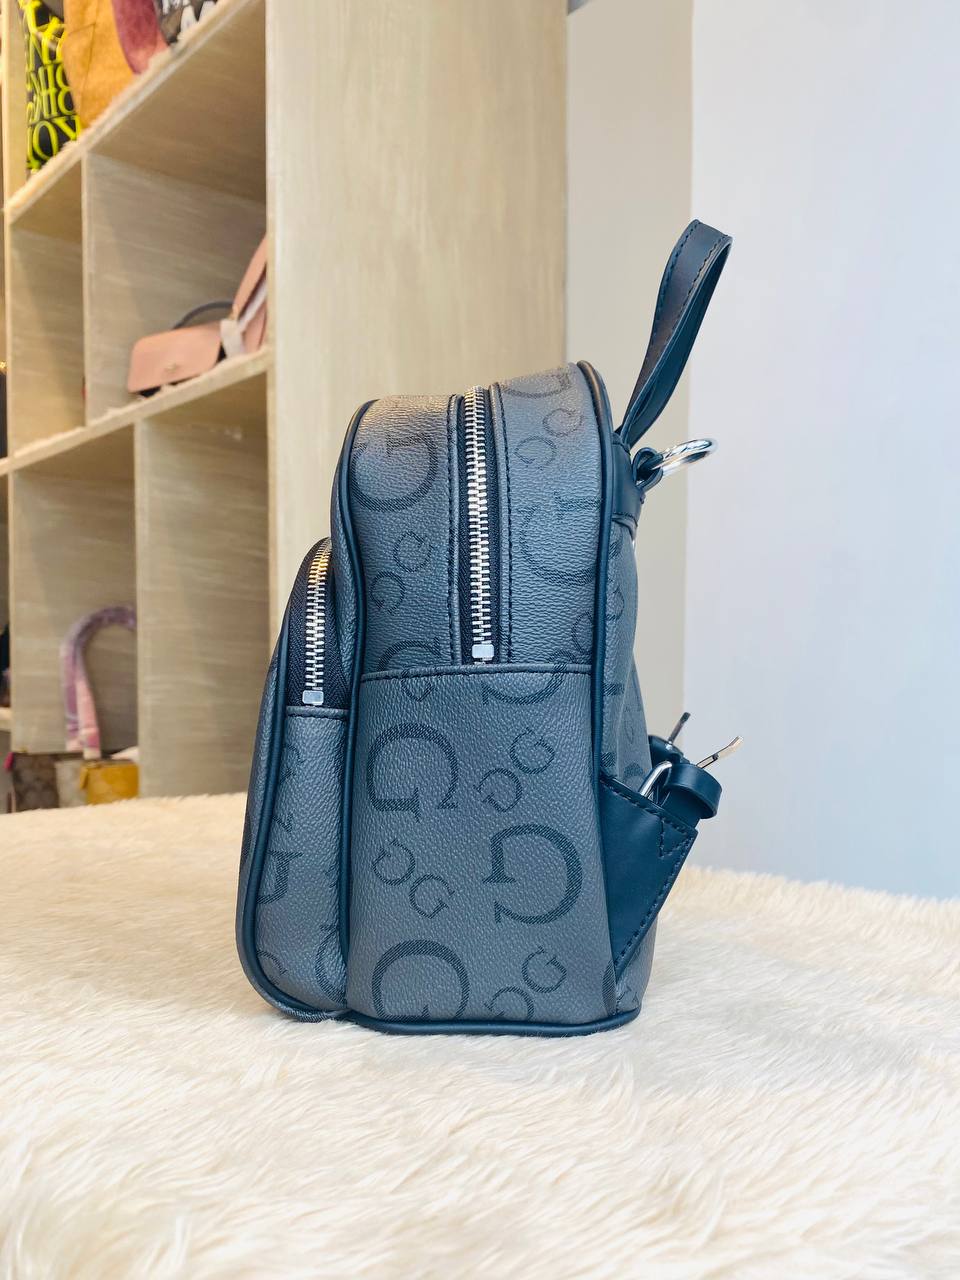 Guess Elisa Mini Backpack (2 colors available)